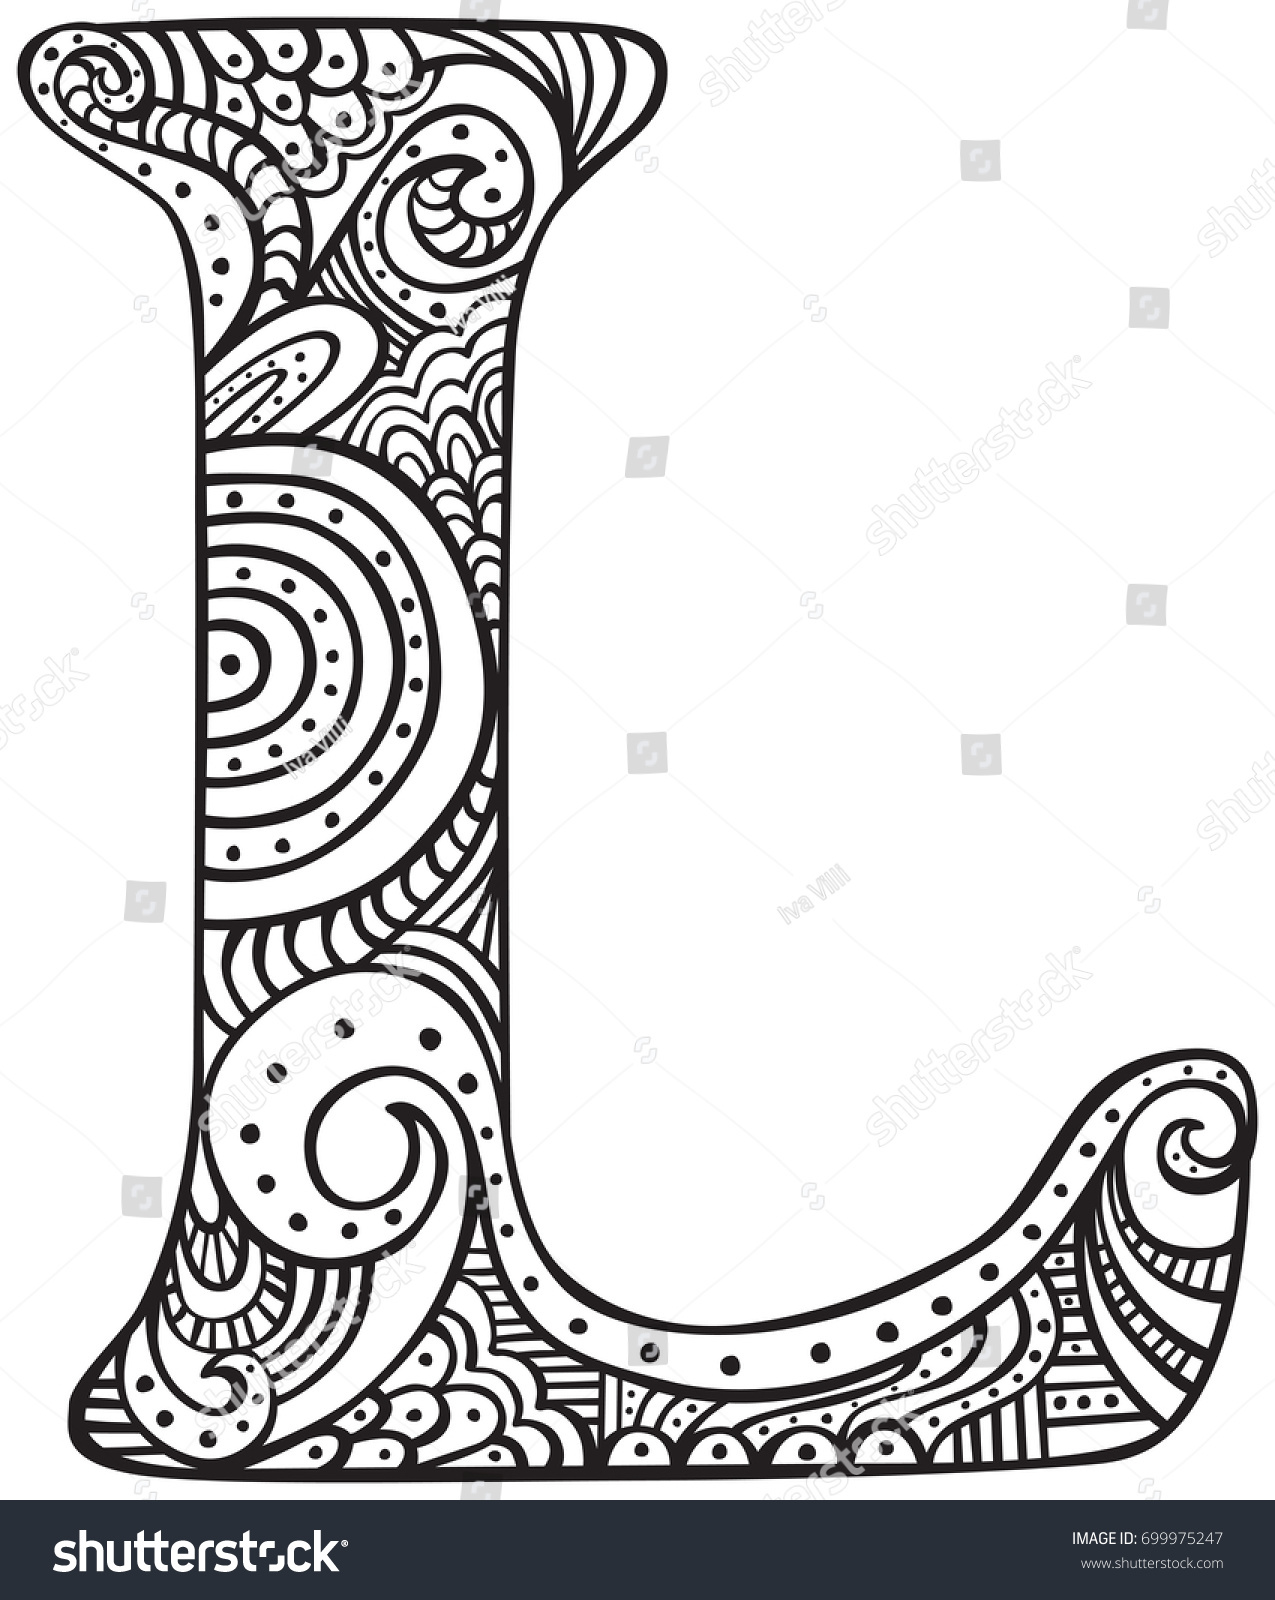 Hand Drawn Capital Letter L Black Stock Vector Royalty Free 699975247